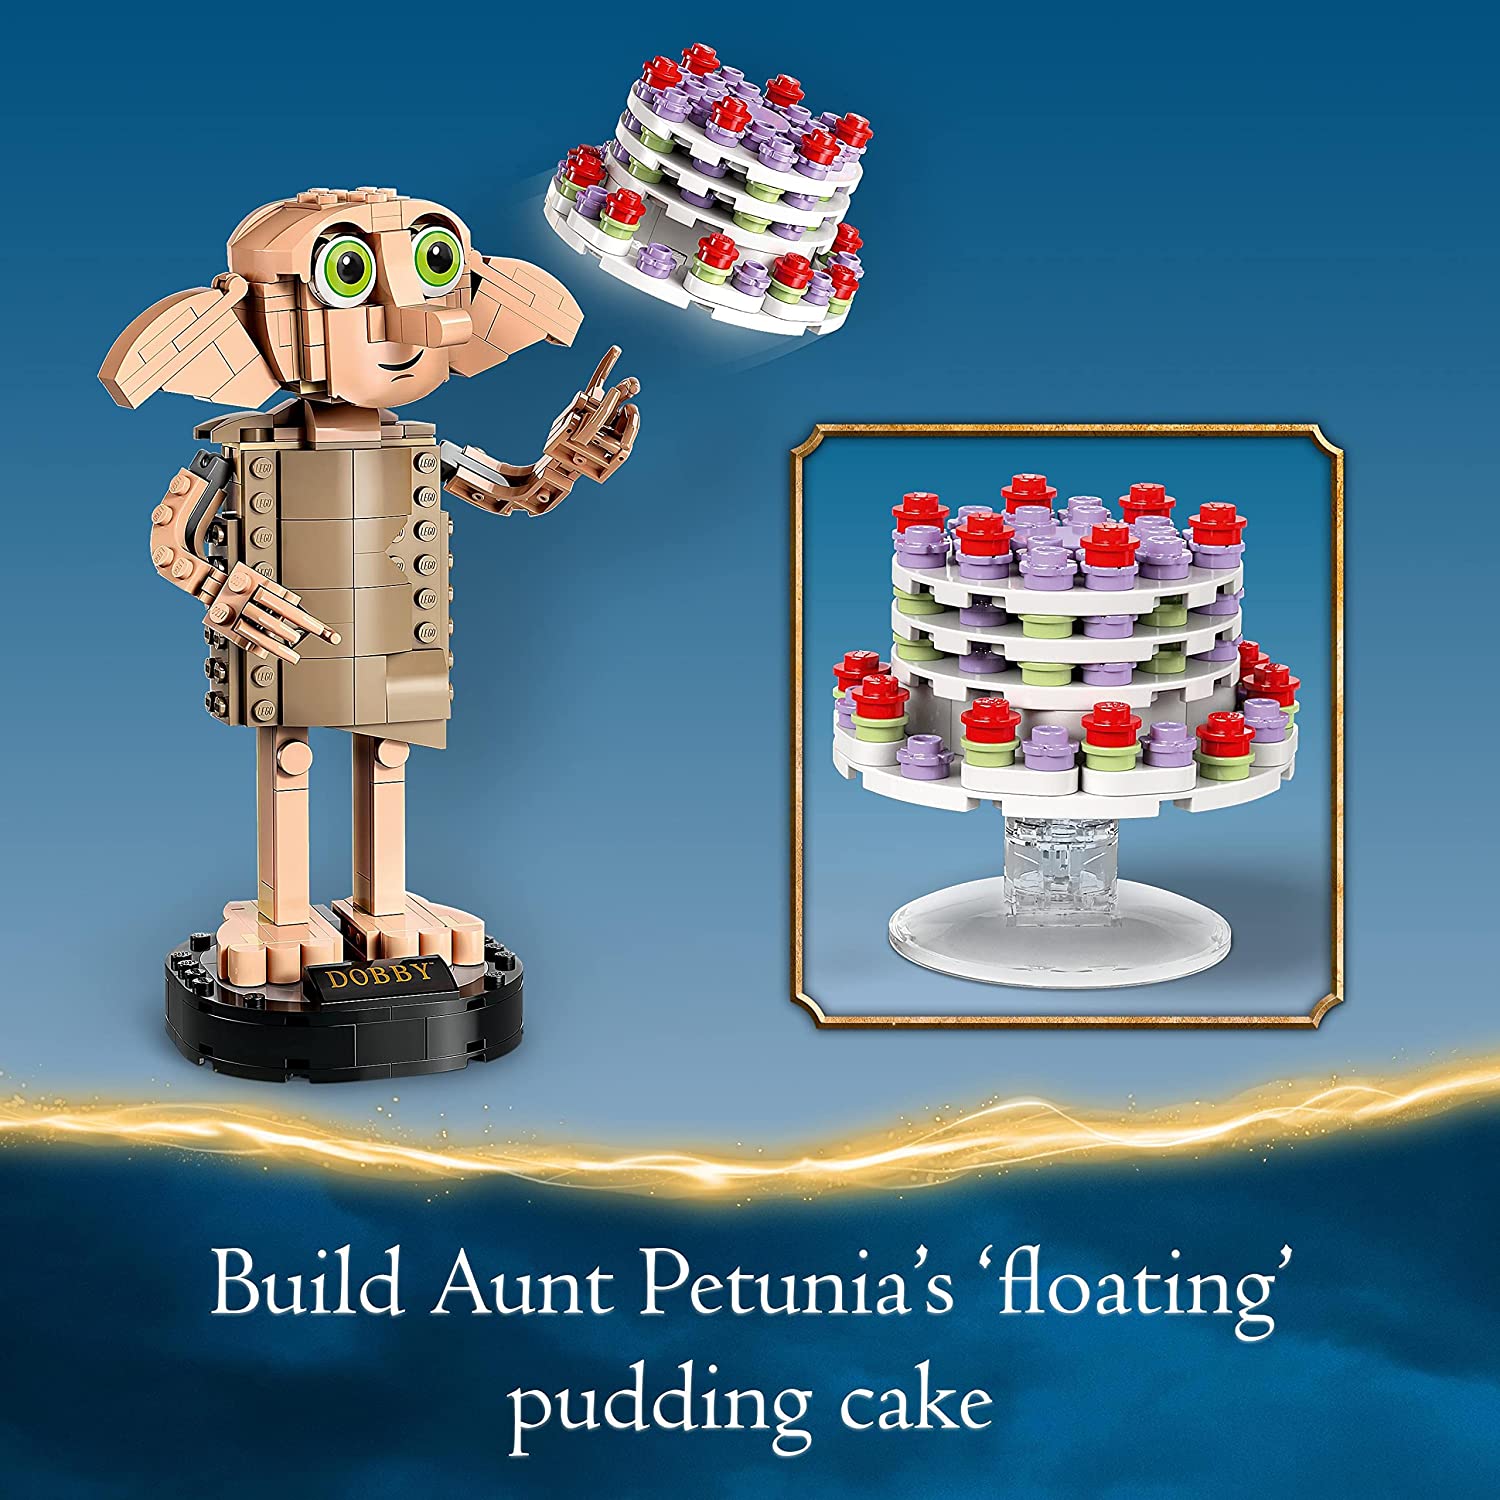 Aunt Petunias Pudding Recipe from Harry Potter - The Scran Line